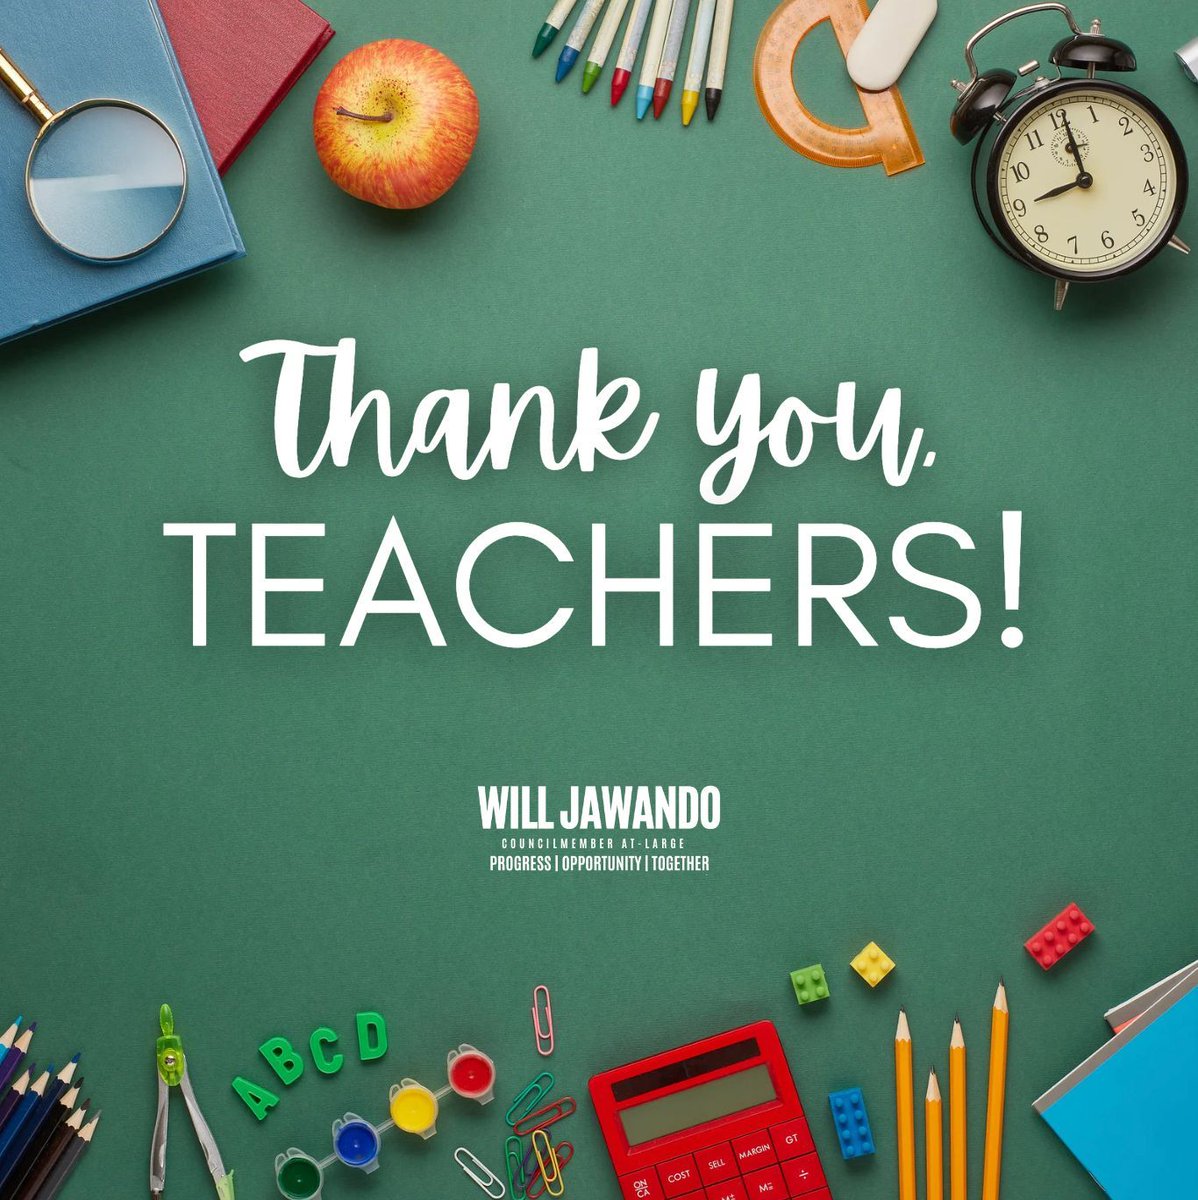 Today is Teachers’ Day. 12,000+ teachers serve our Montgomery County students every day. Thank you to all of our teachers, who are changing lives every day!